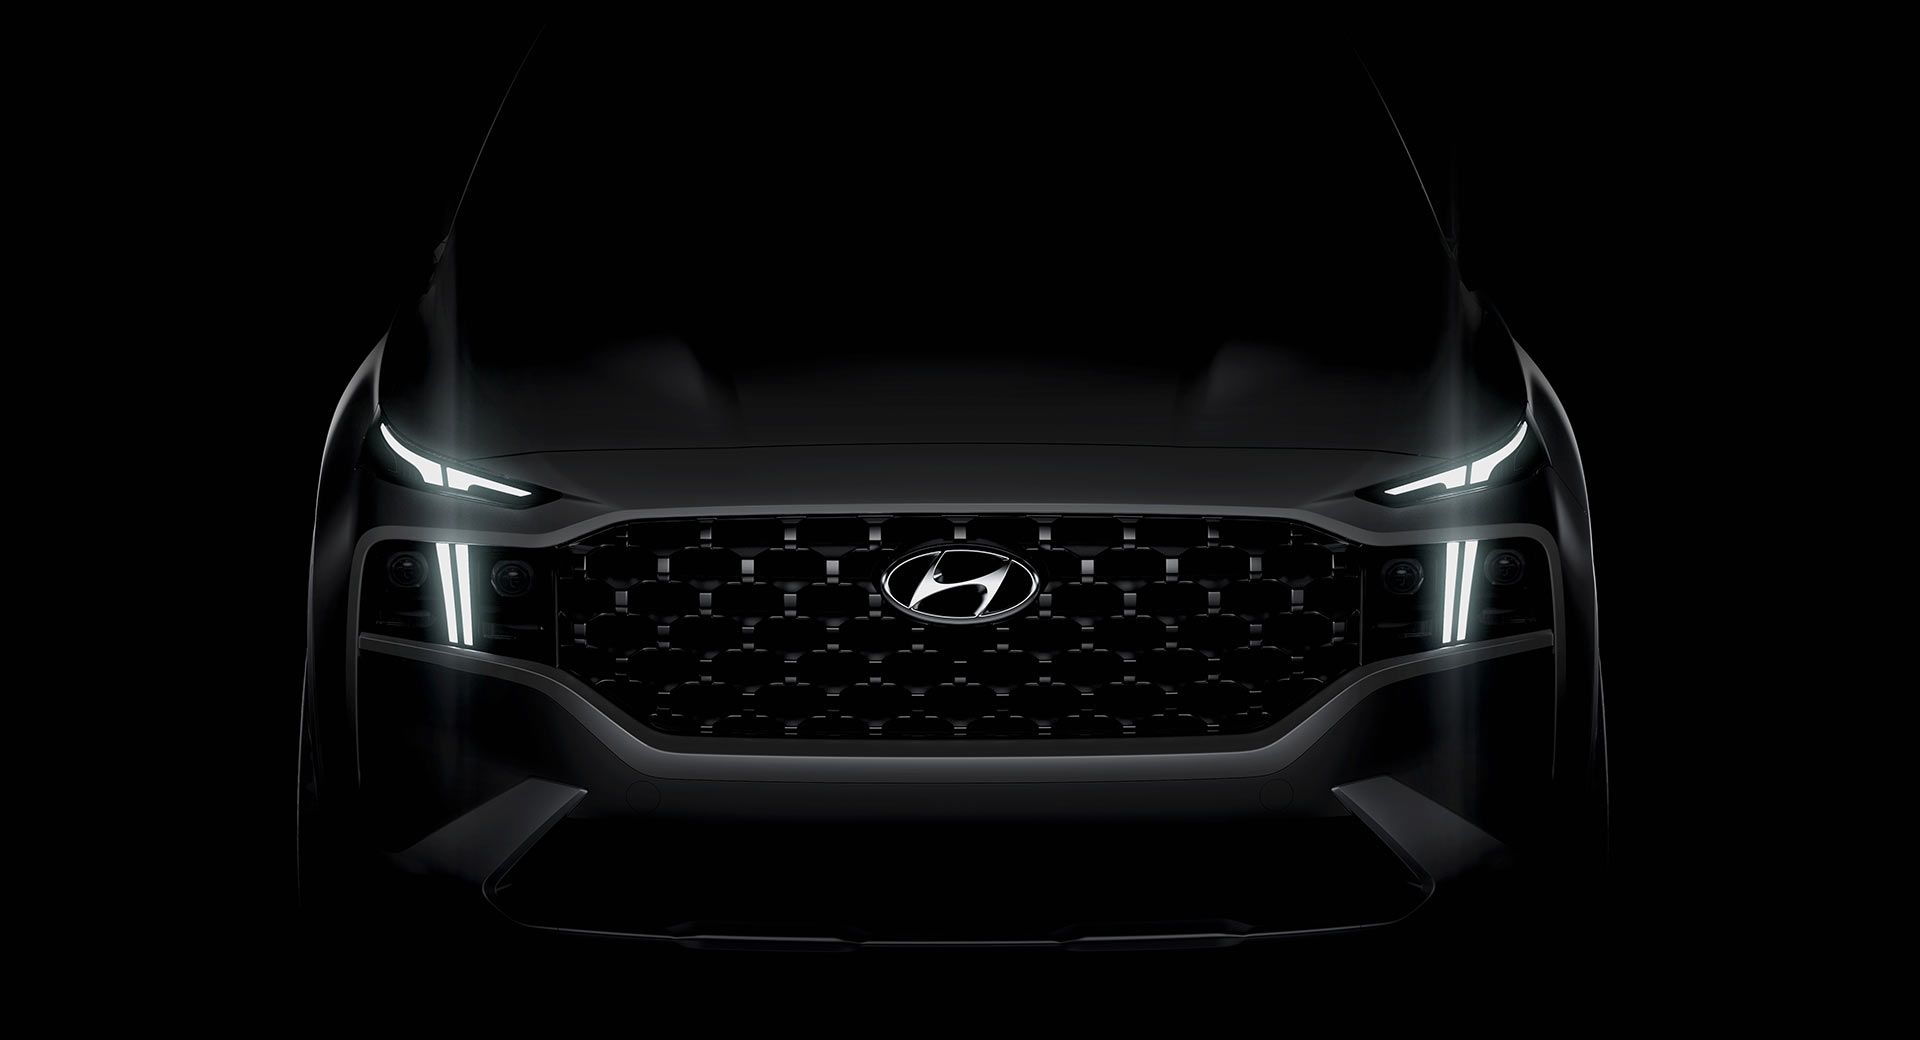 New 2021 Hyundai Santa Fe Teased And It's More Than Just A Facelift